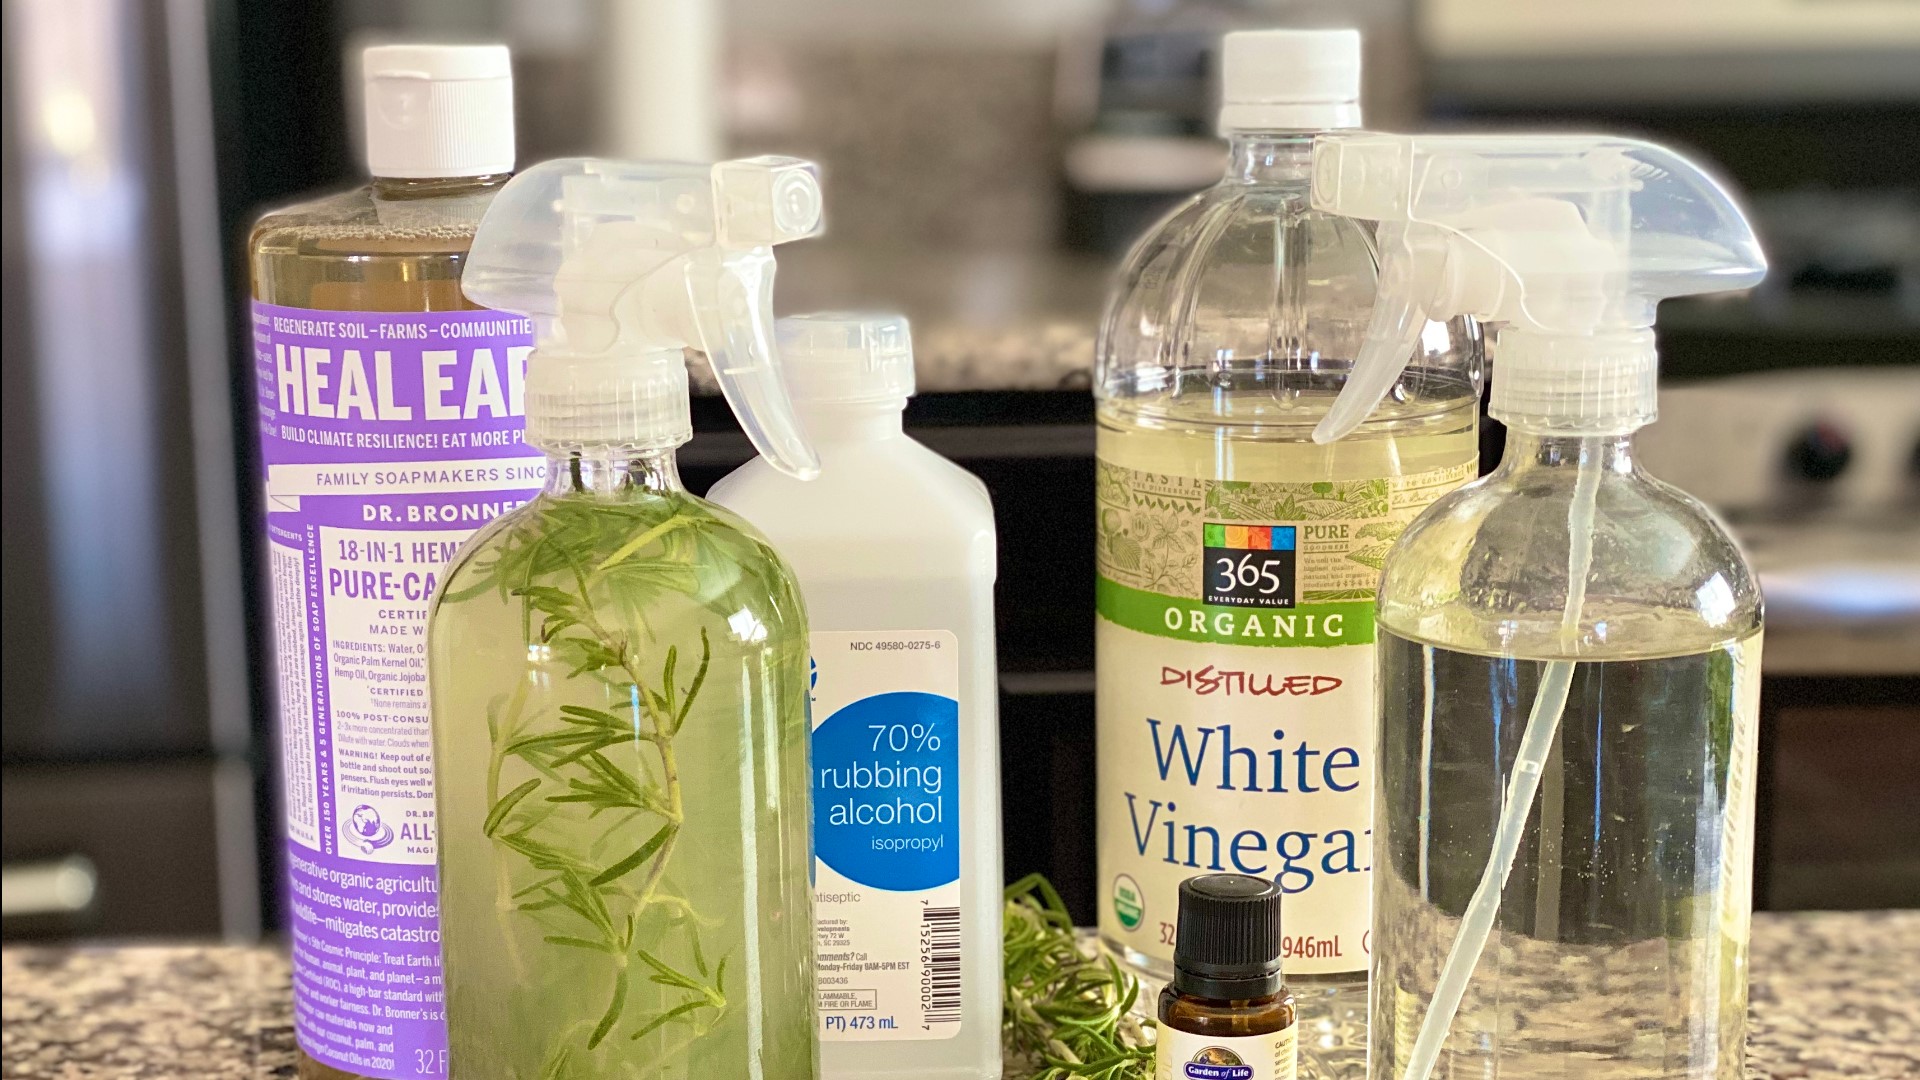 Megan Evans shares two DIY cleaners that are easy to make. The great part is, you might already have all the ingredients in your kitchen now.